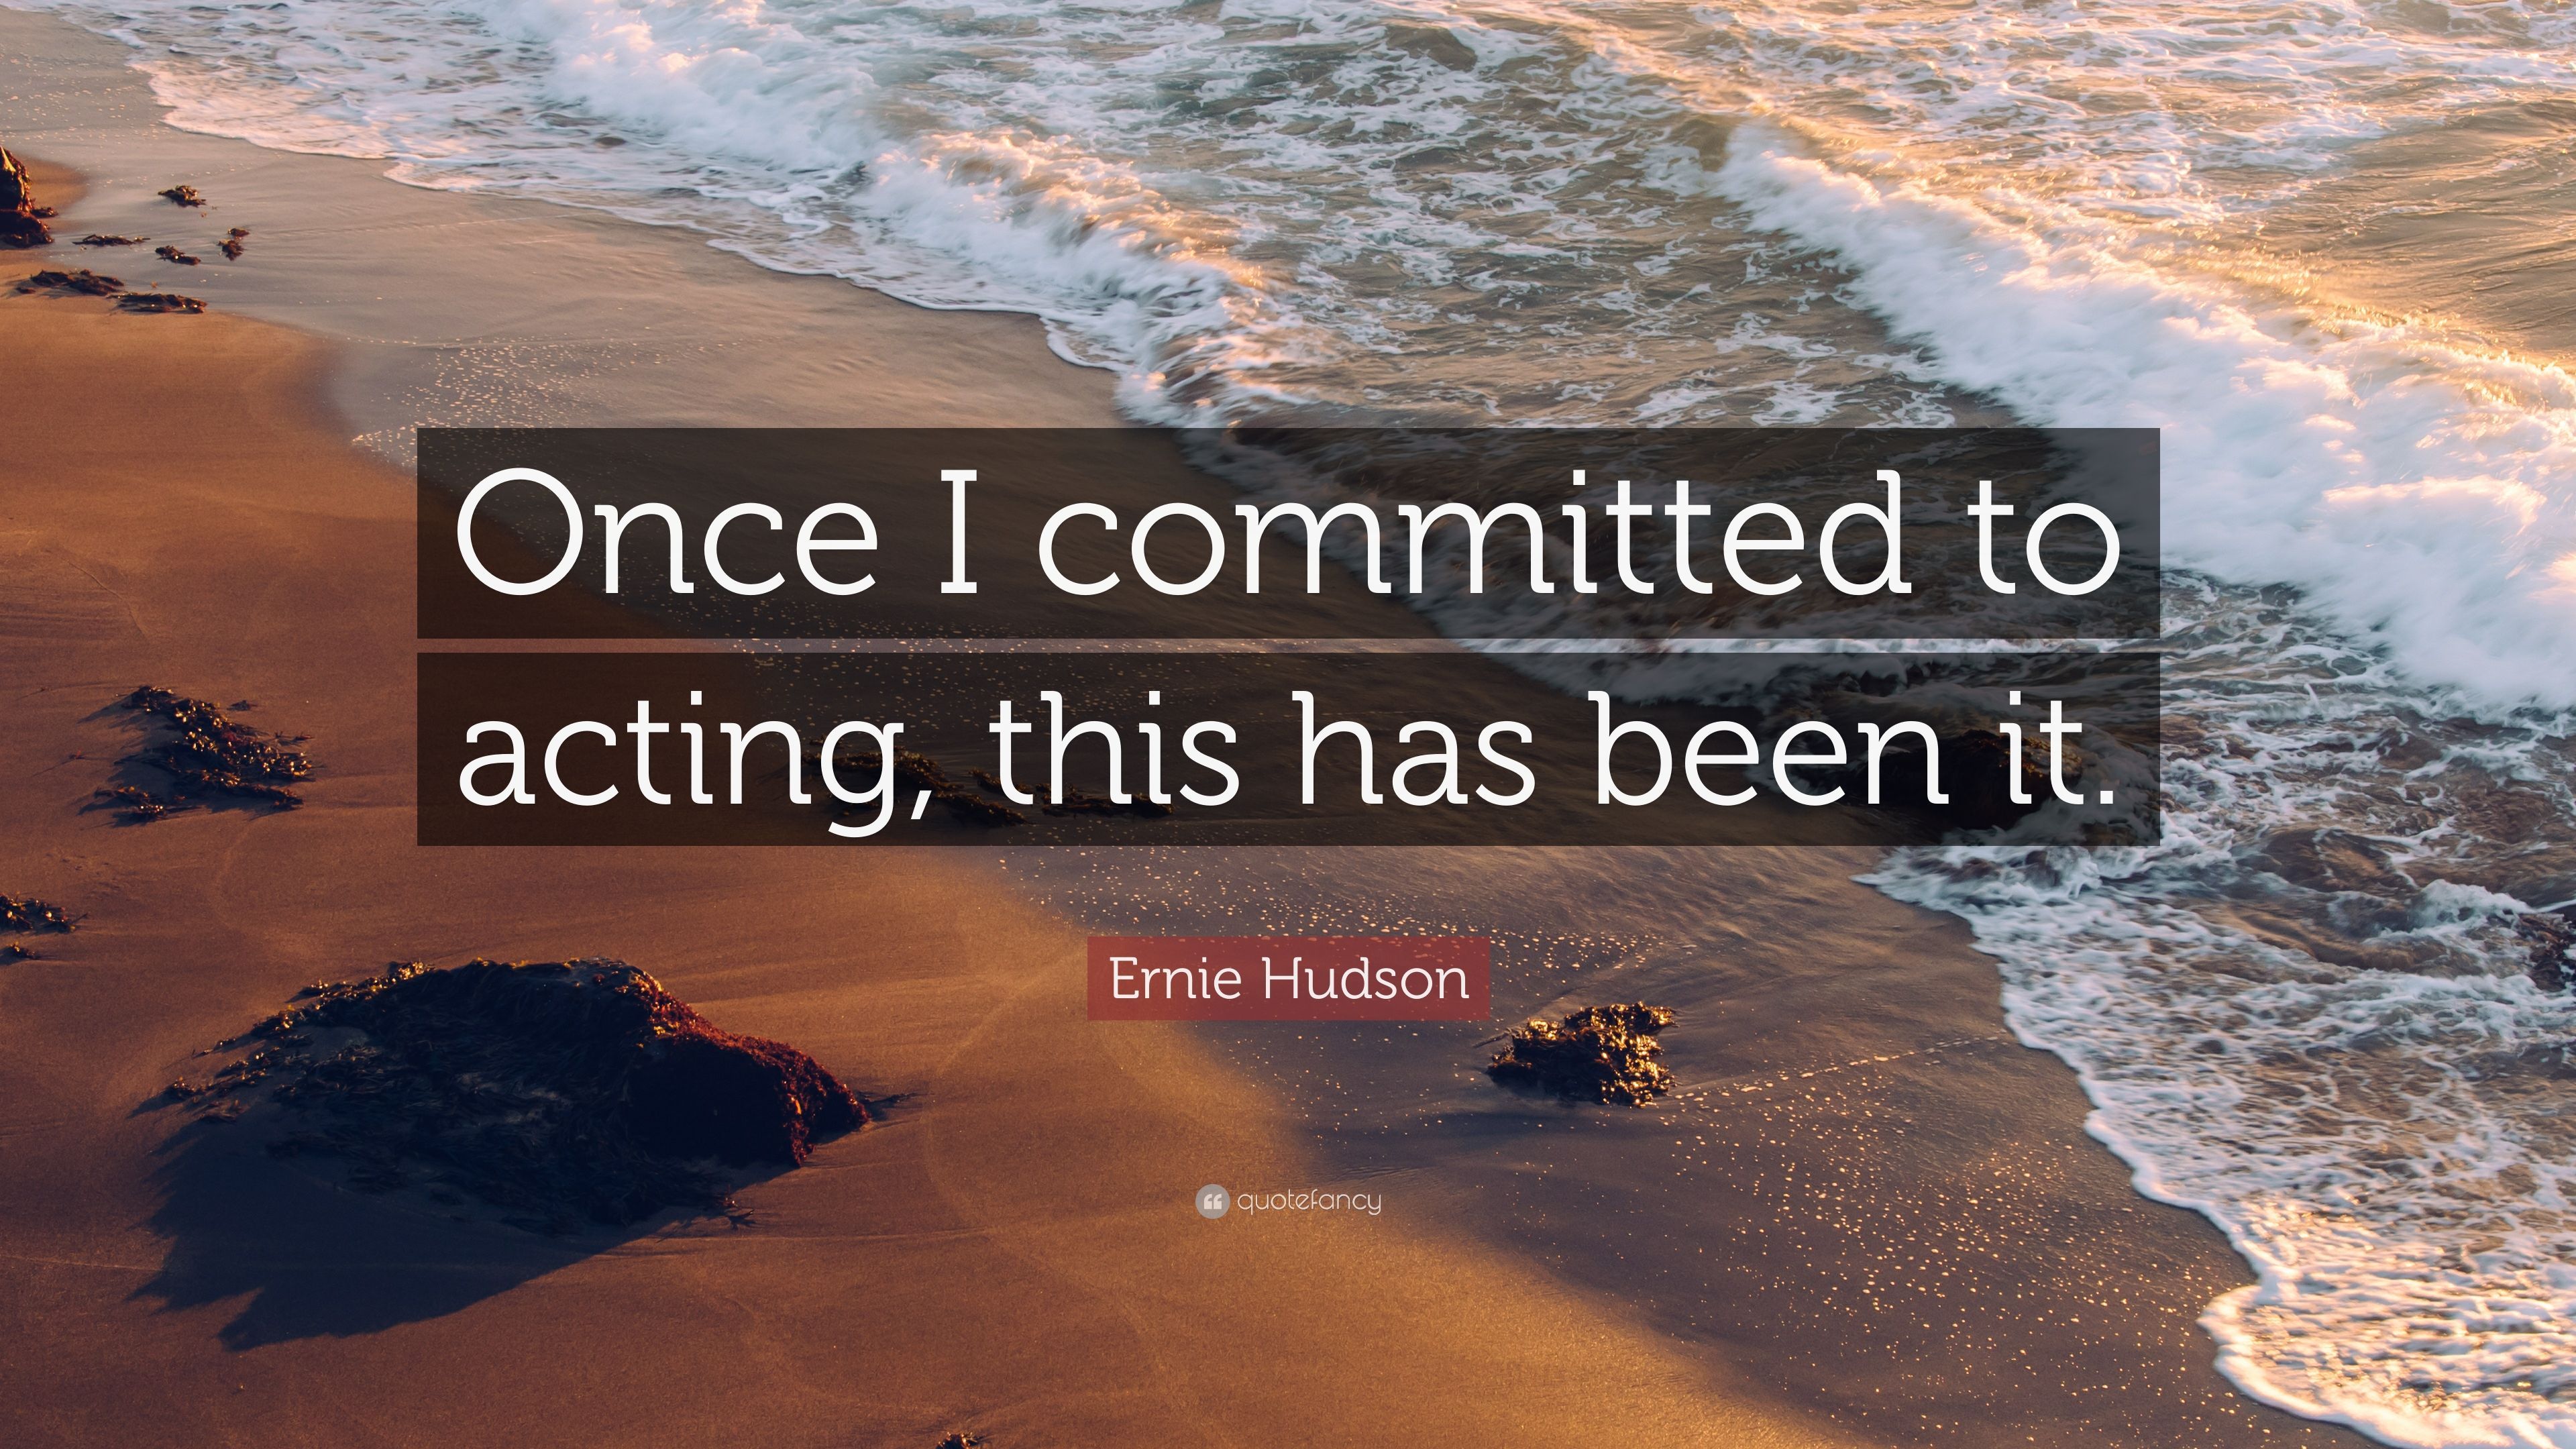 Ernie Hudson Quote: “Once I committed to acting, this has been it